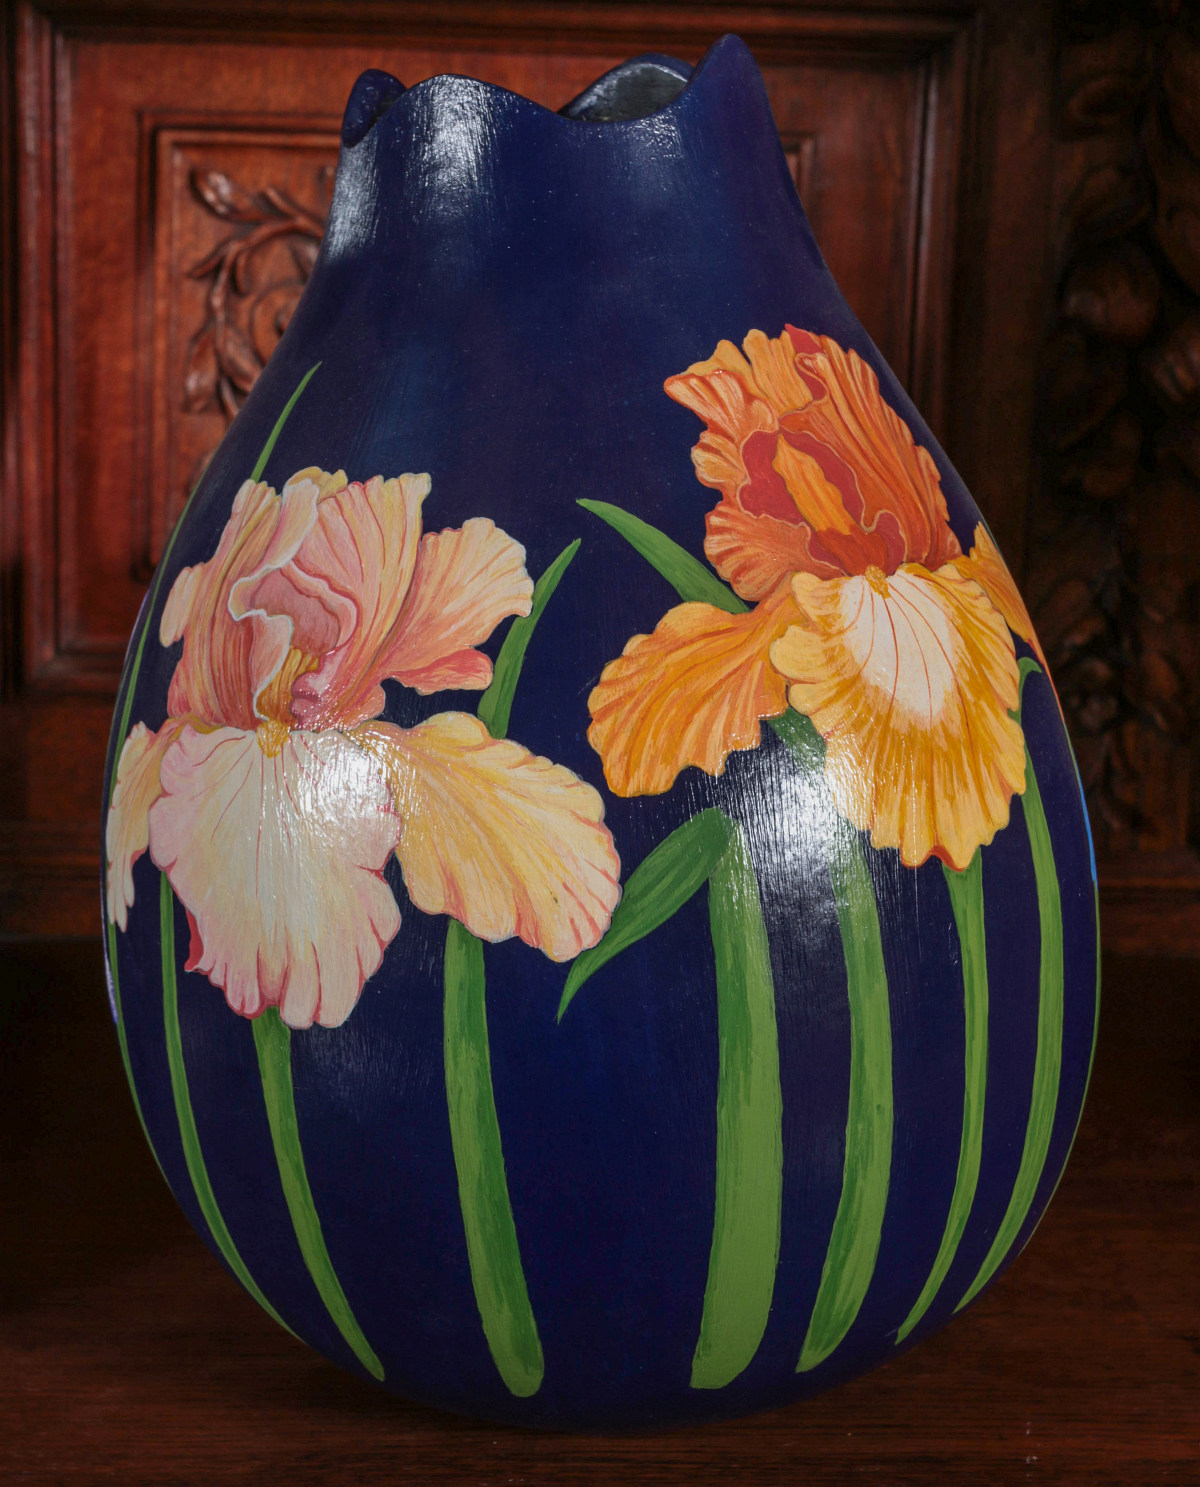 A HAND PAINTED VASE BY SANTA FE ARTIST